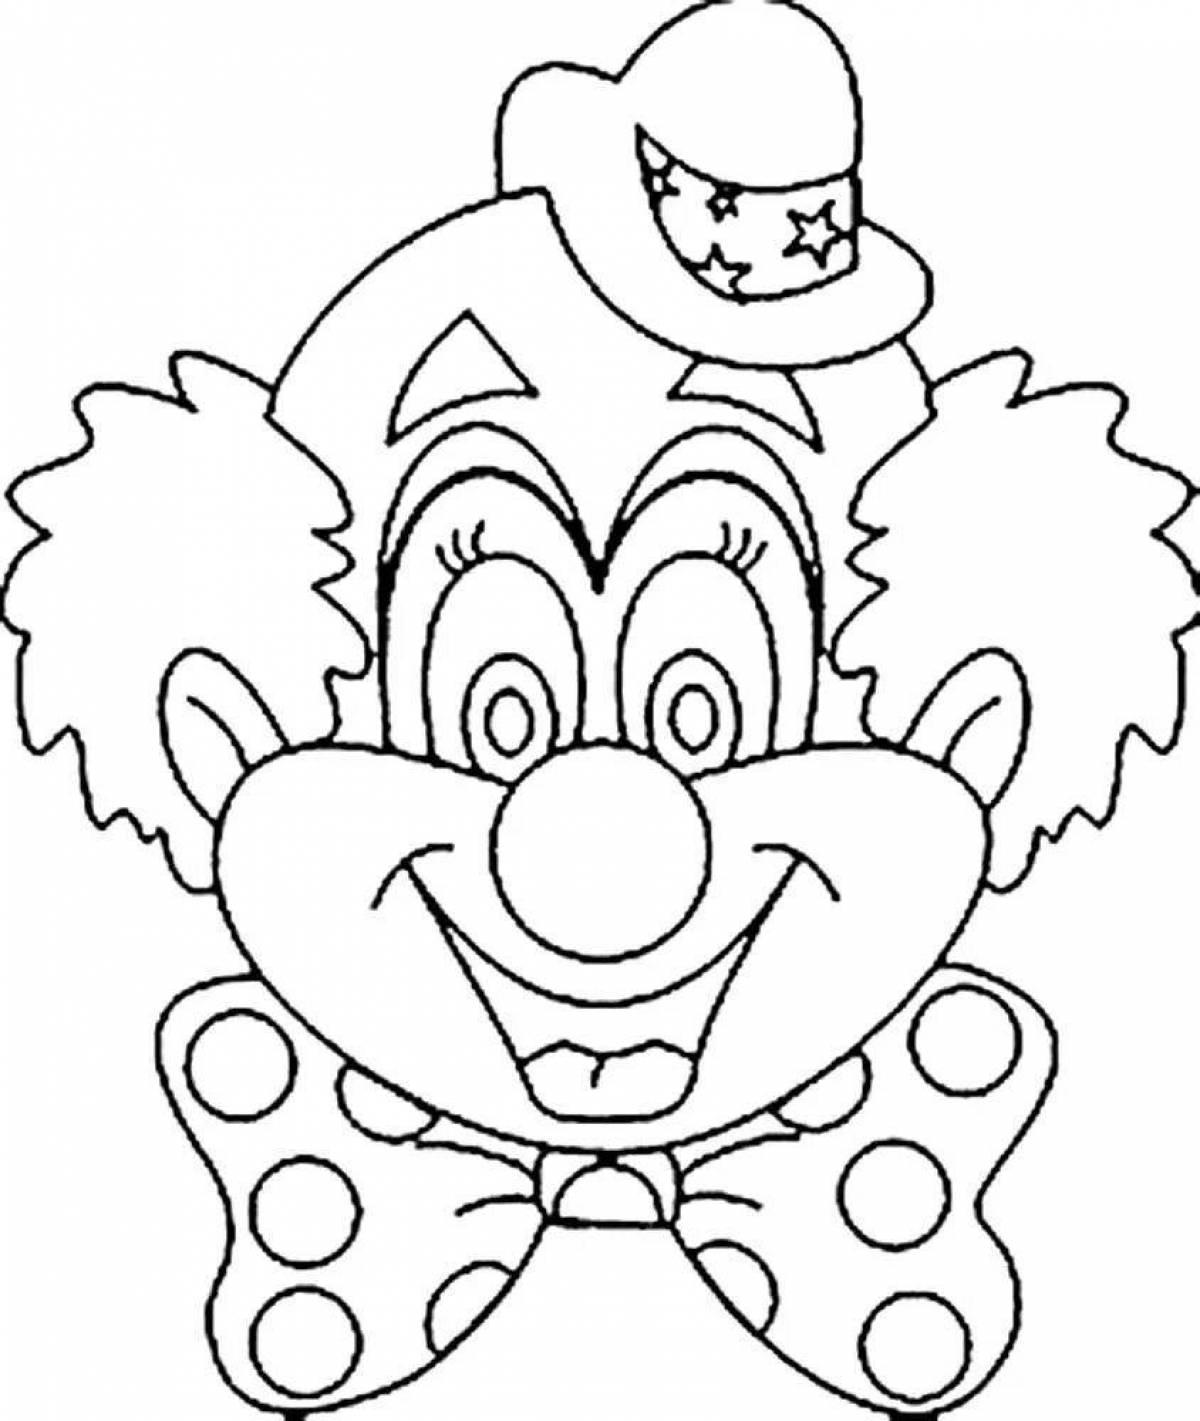 Adorable clown face coloring page